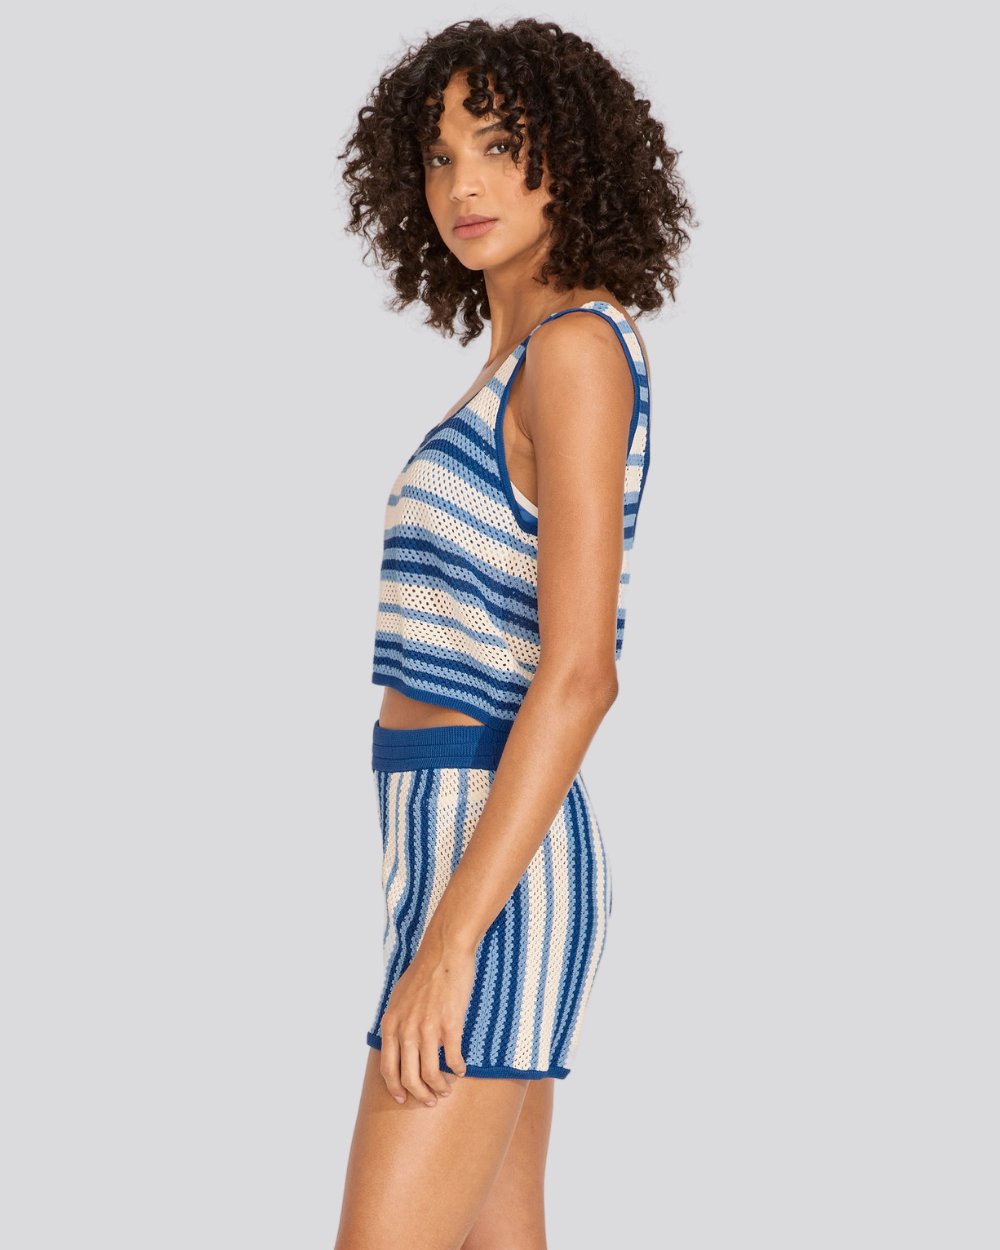 The Charlie Tank - Solid & Striped